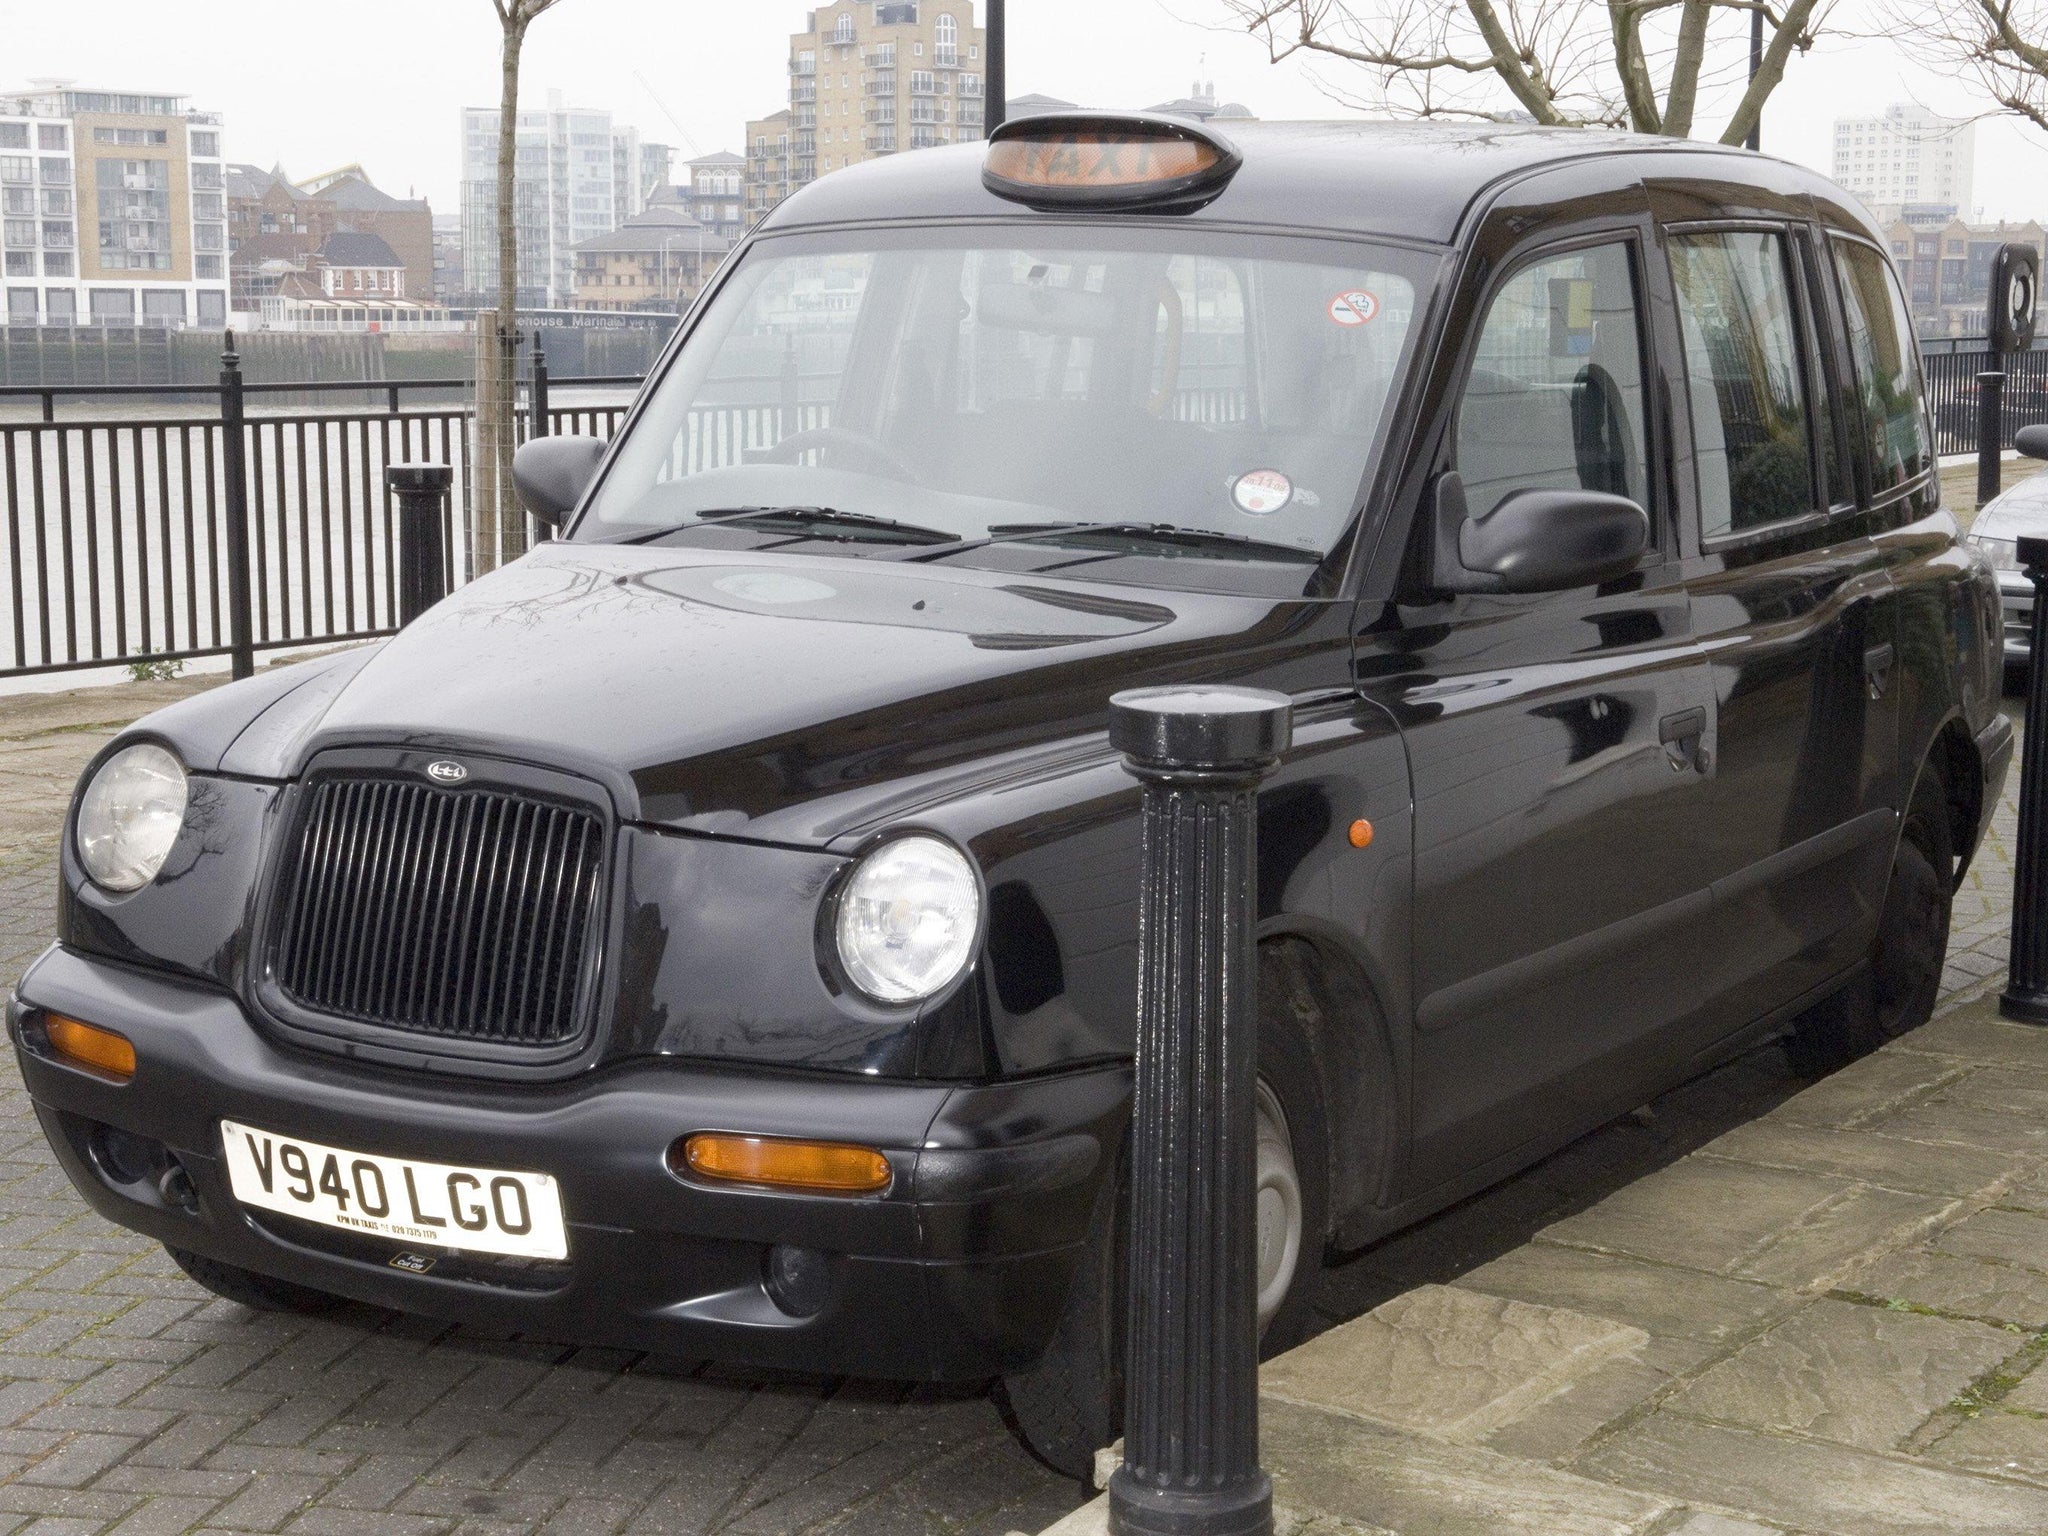 The black cab John Worboys used to pick up victims